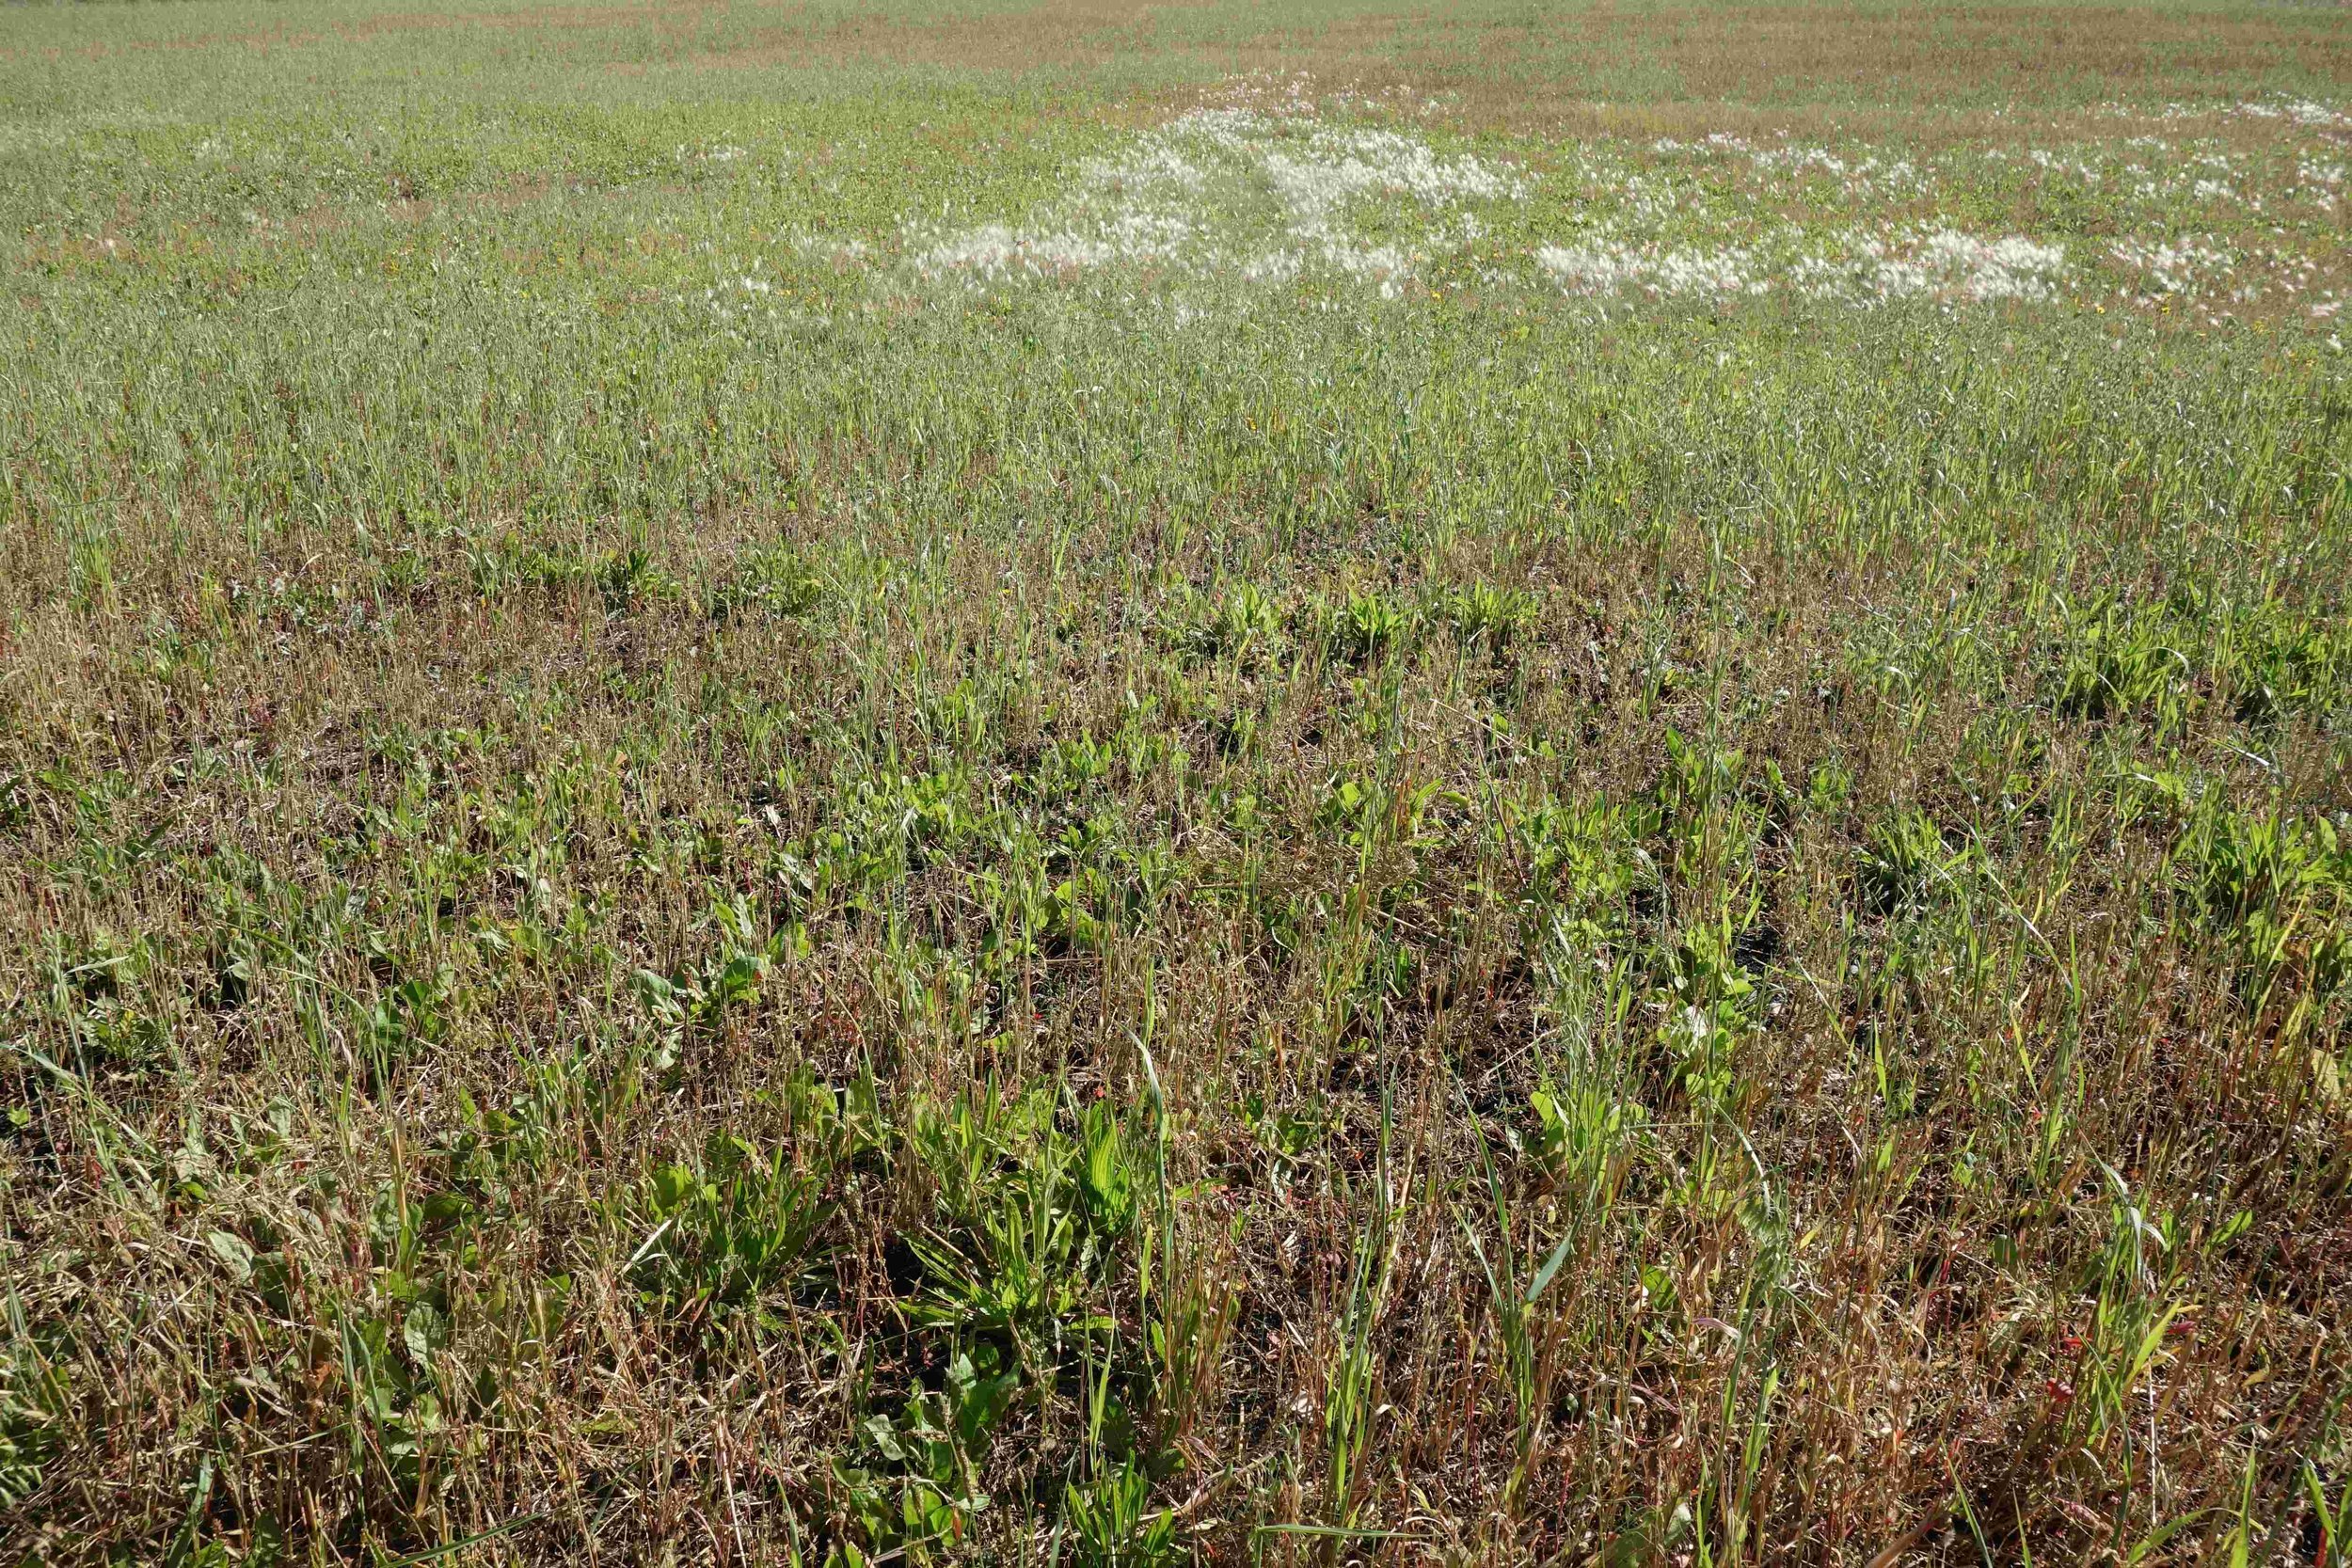 Chicory regrowth after harvest